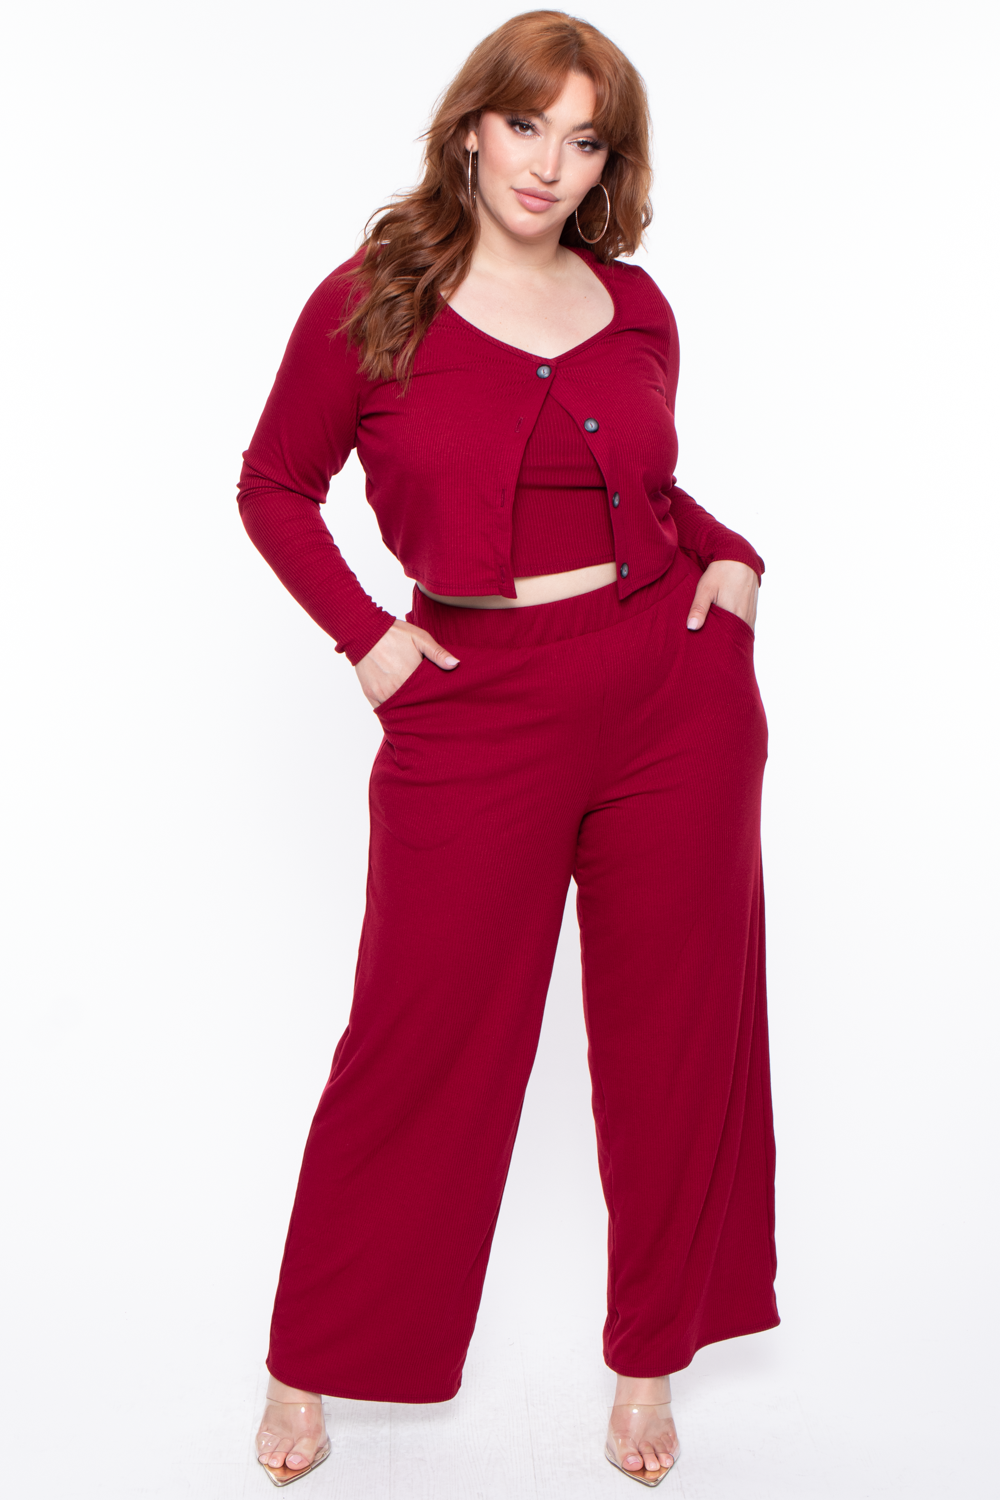 Curvy Sense Tops 1X / Burgundy Plus Size Essential Ribbed Button Front Top - Burgundy